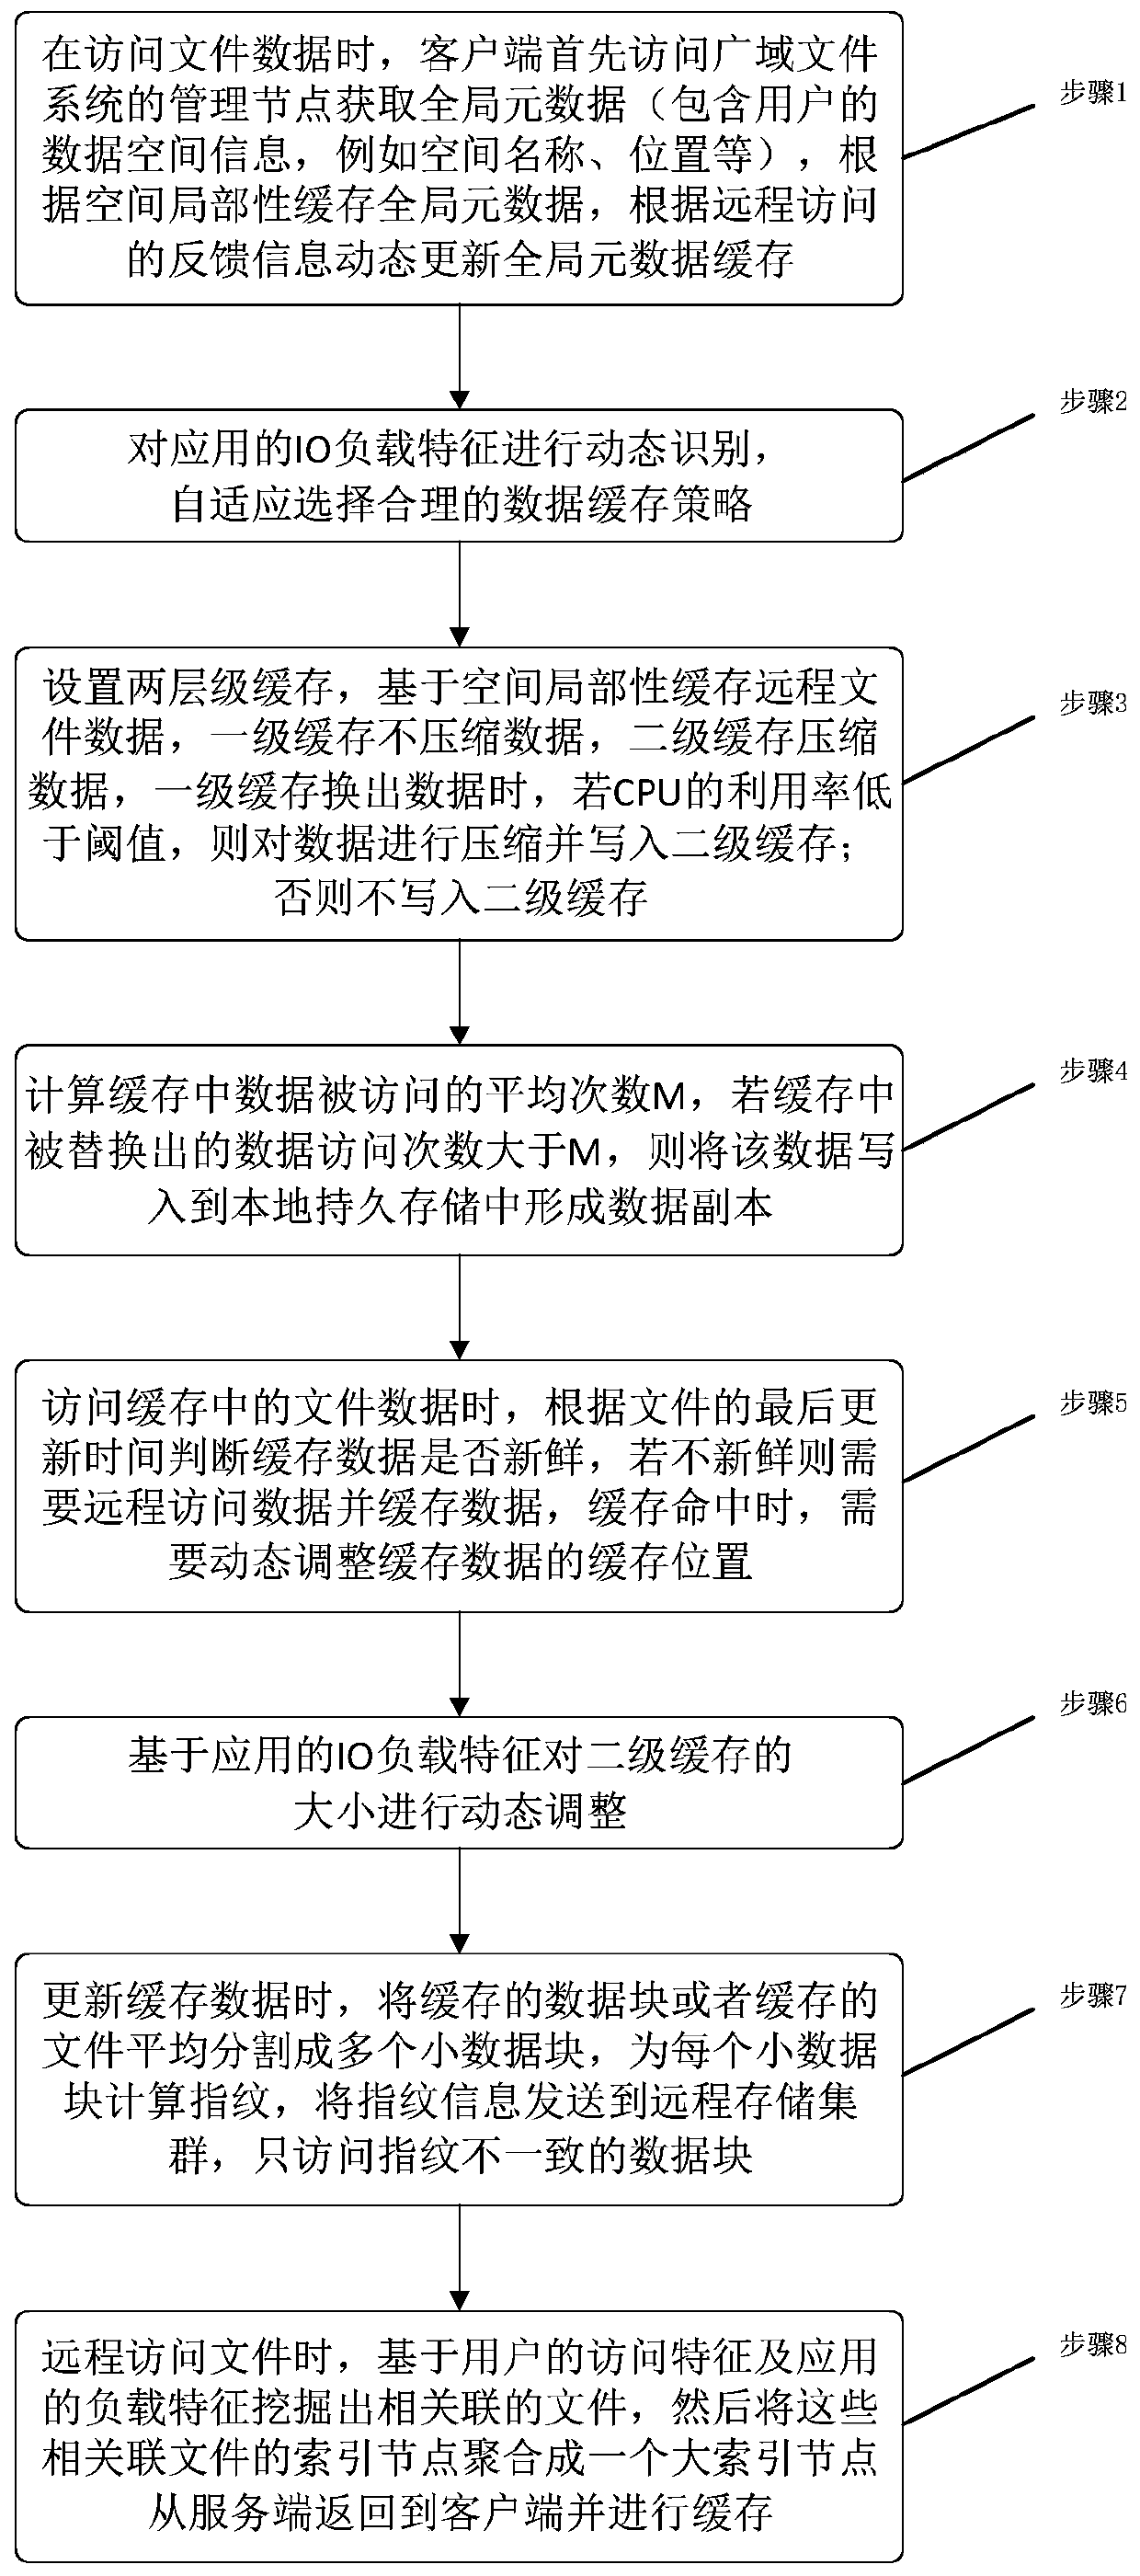 Remote file data access performance optimization method based on efficient caching of client